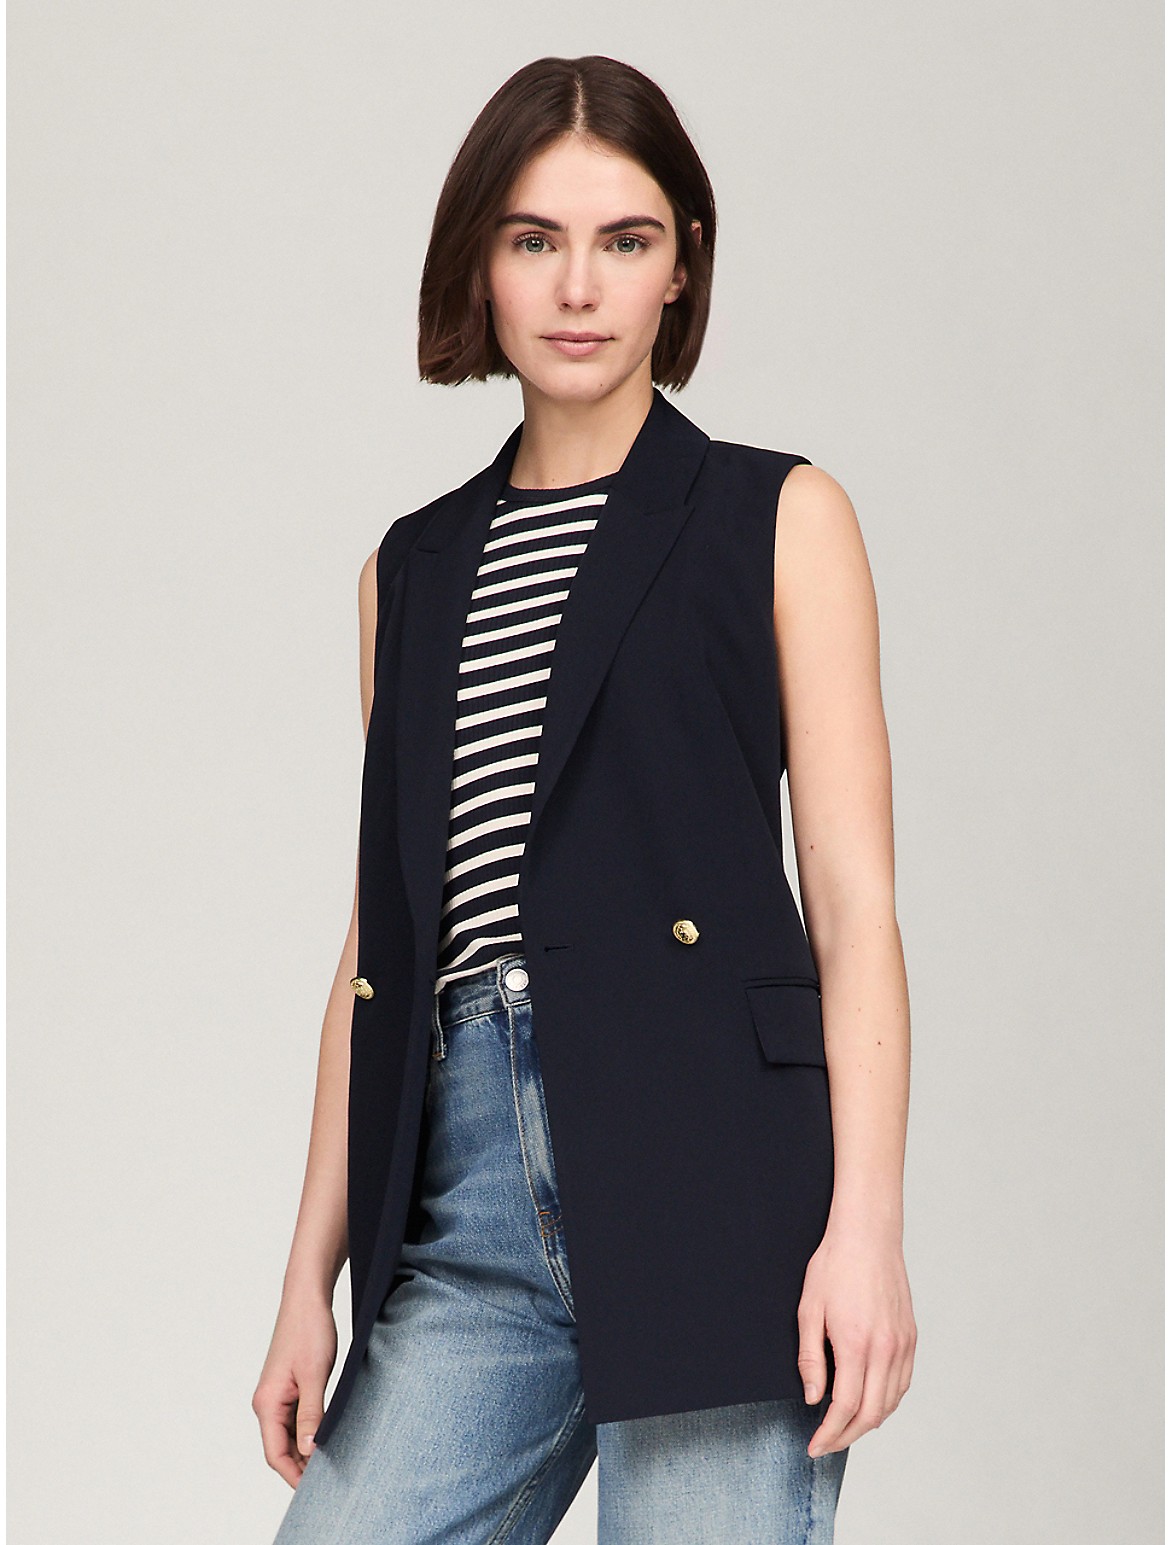 Tommy Hilfiger Women's Sleeveless Double-Breasted Blazer